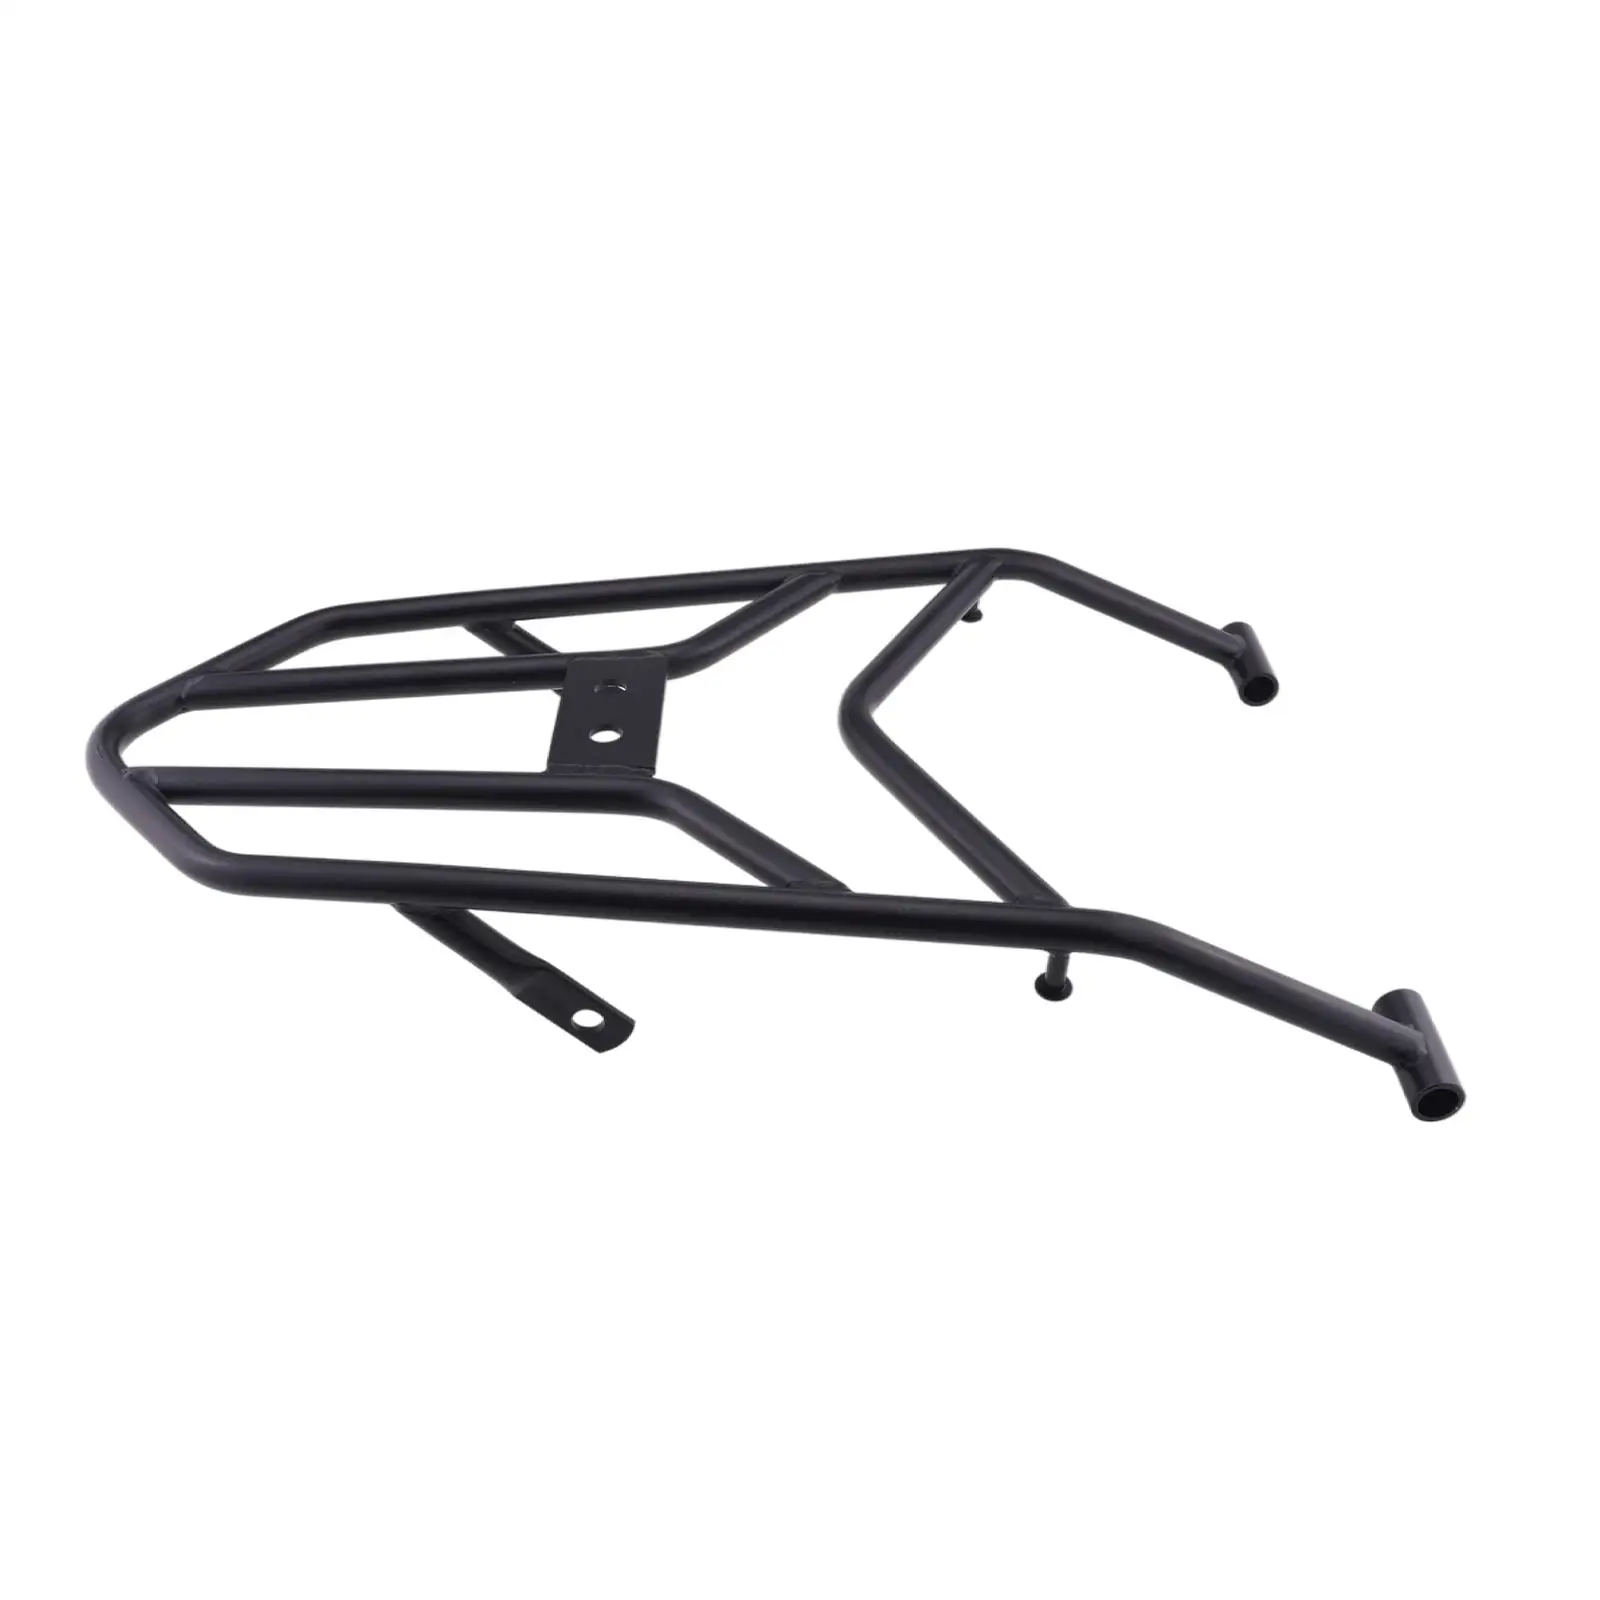 Motorcycle Rear Tail Rack Motorcycle Parts for